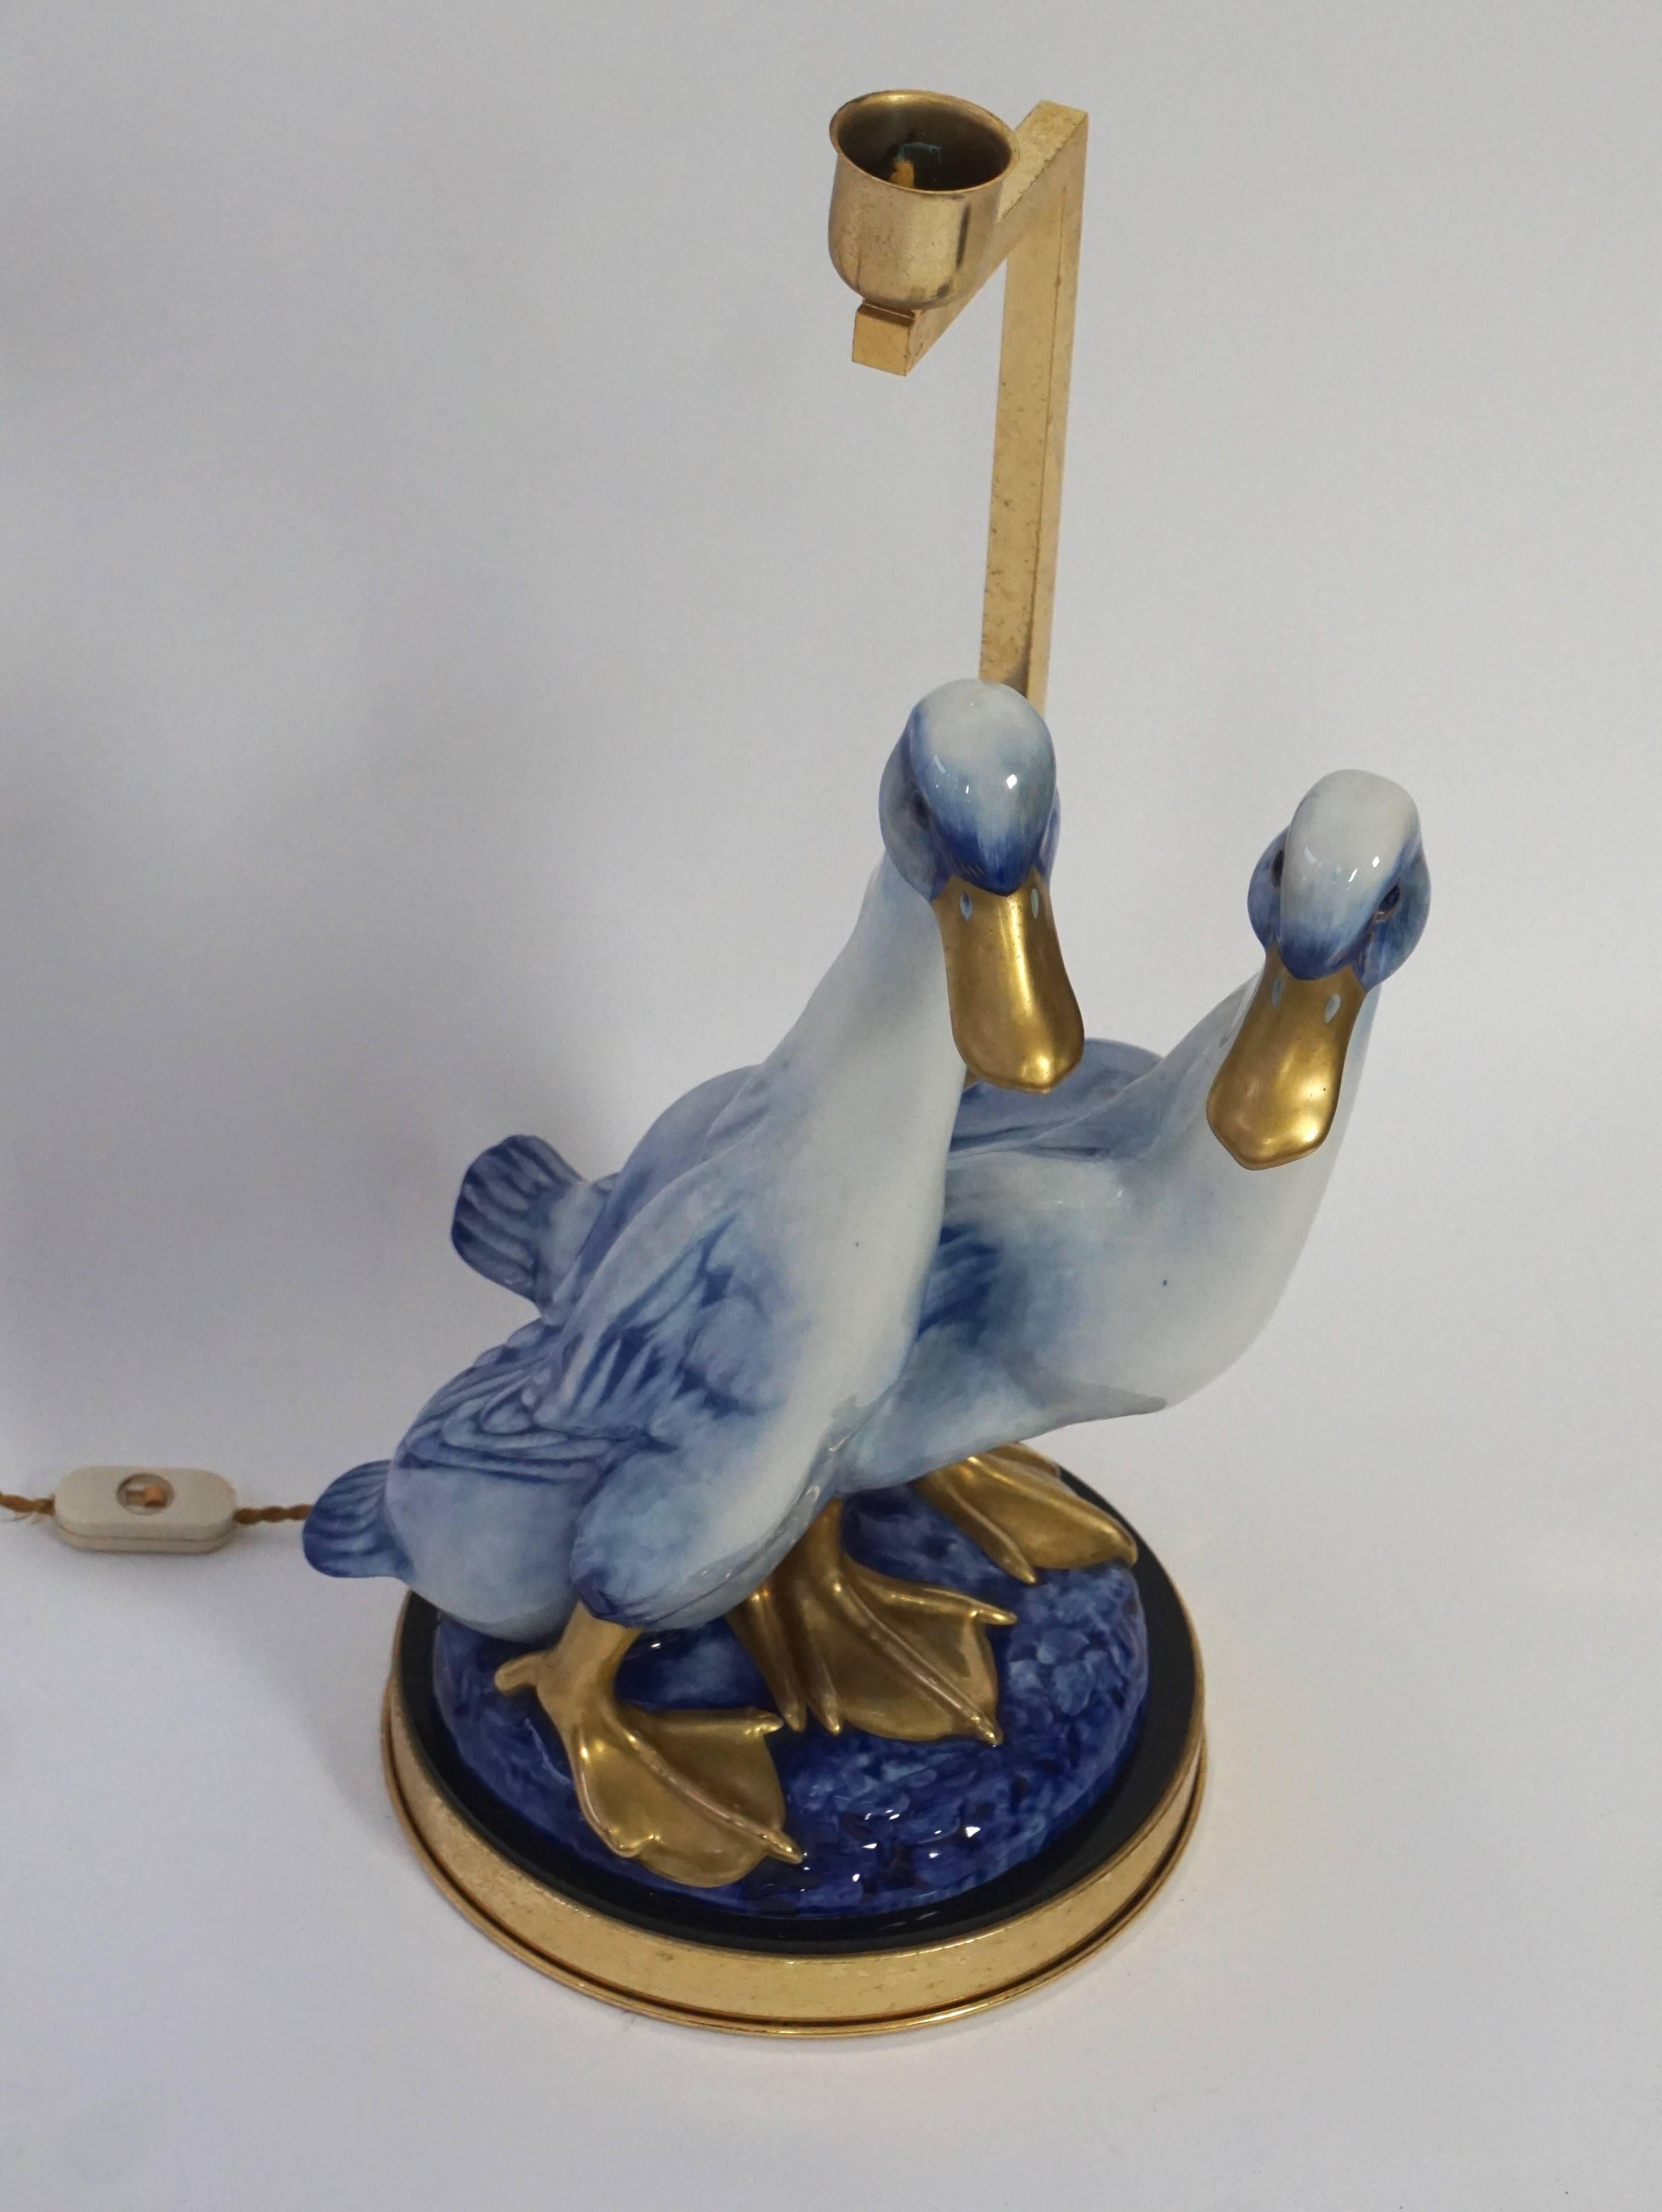 Porcelain pair of ducks figurine, mounted as a lamp, Fine filigree brass mountings on an round base. Must be rewired.
Measures: Height 57 cm.3
 